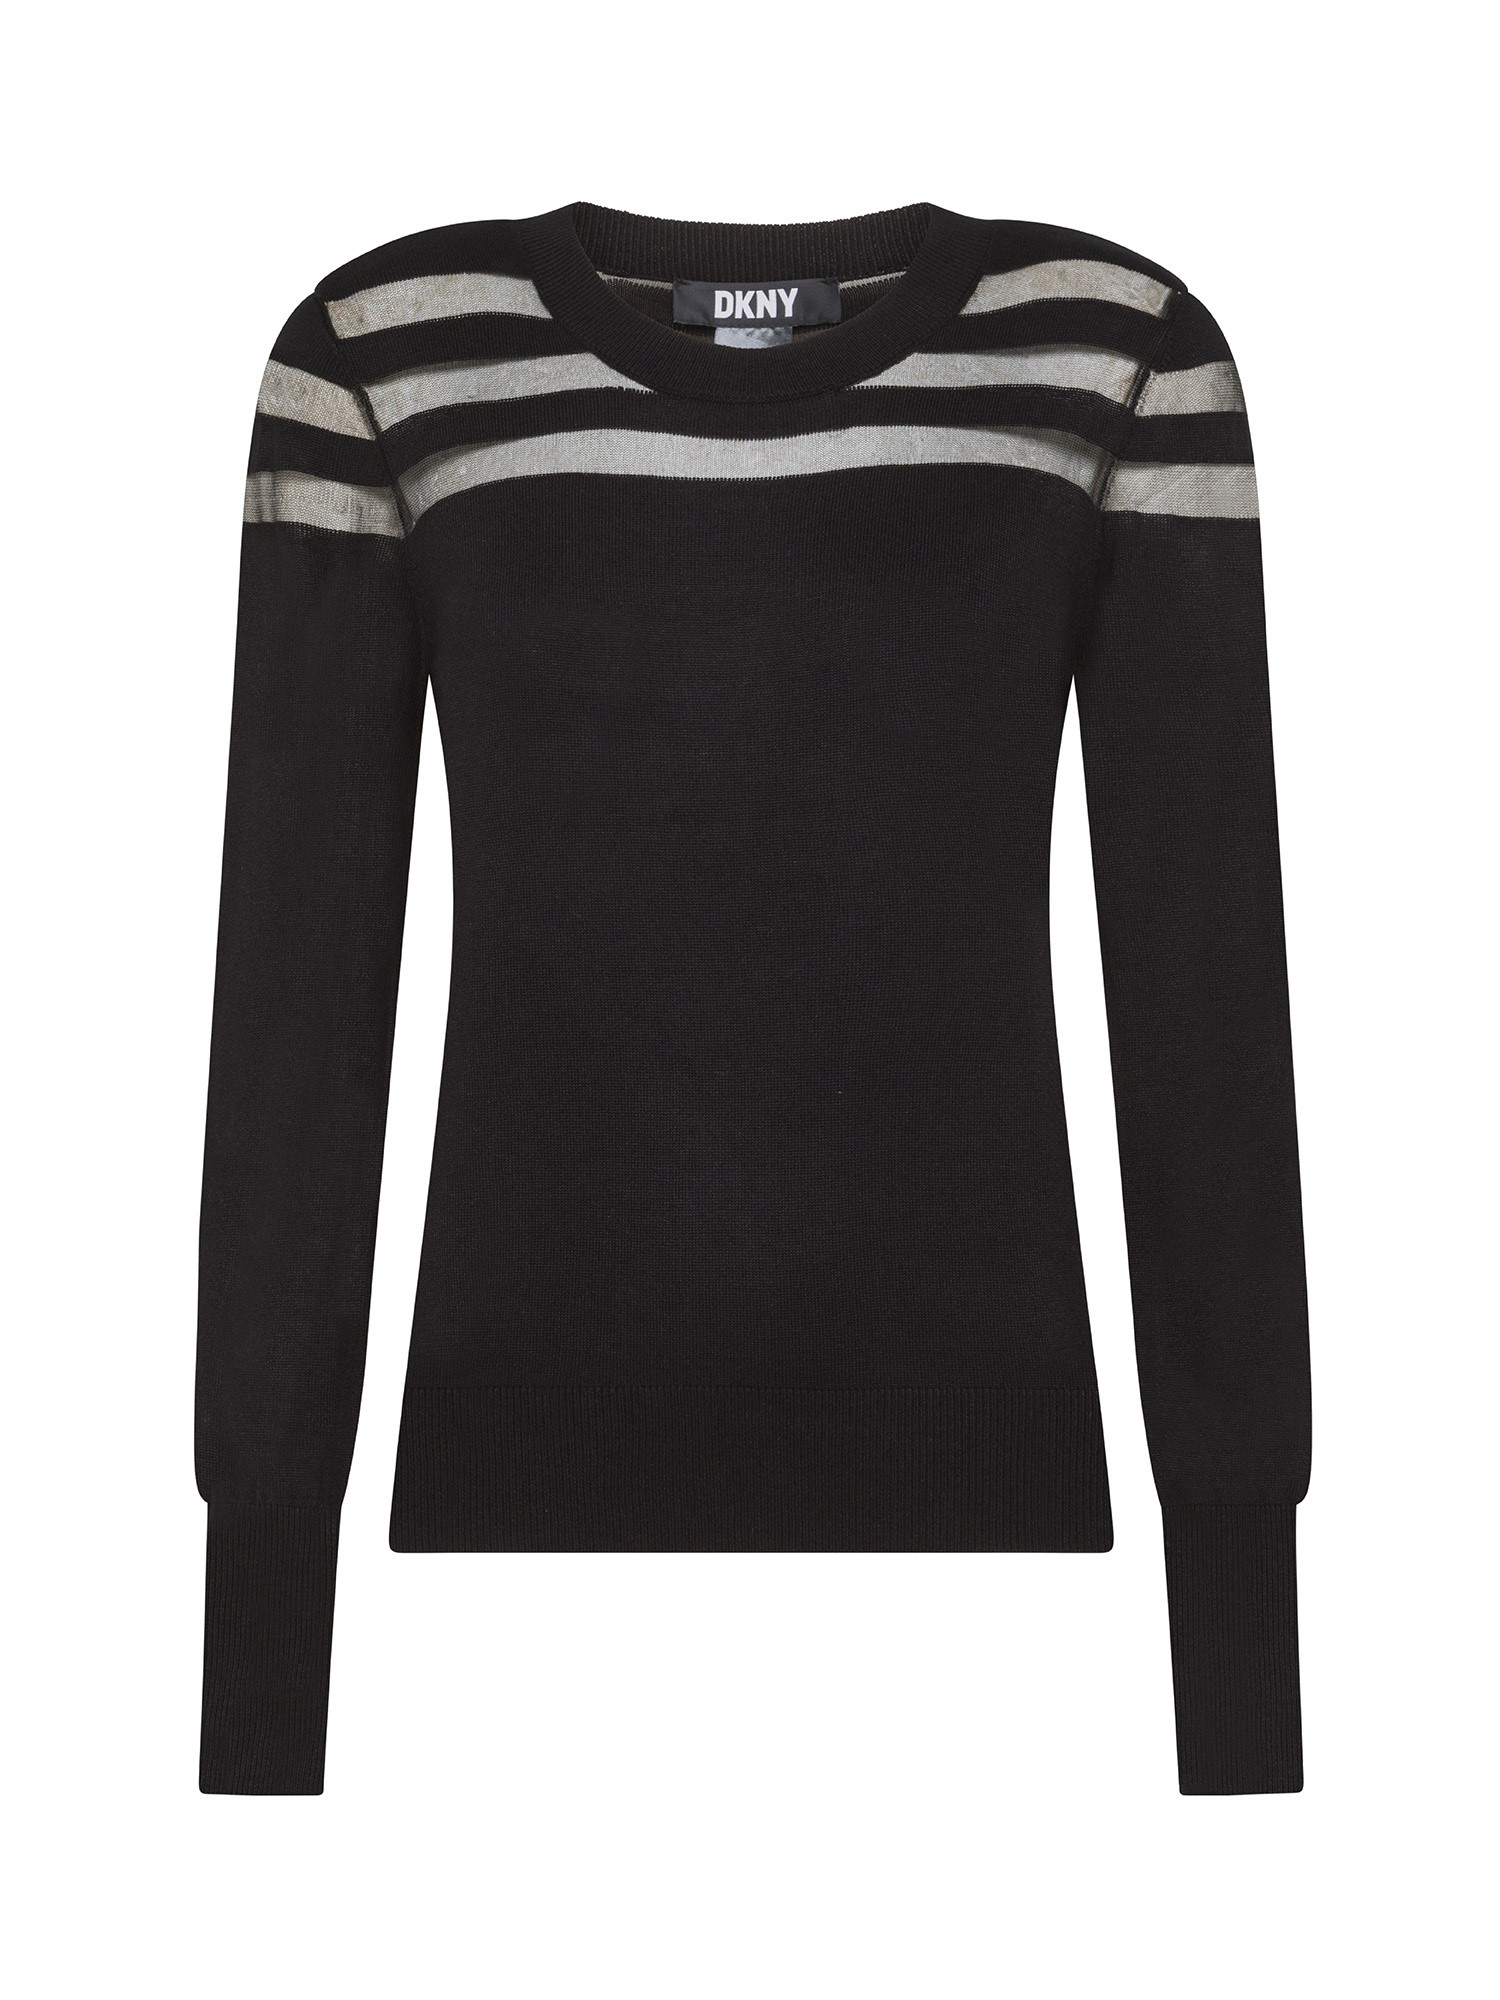 DKNY - Crew neck sweater with striped mesh detail, Black, large image number 0